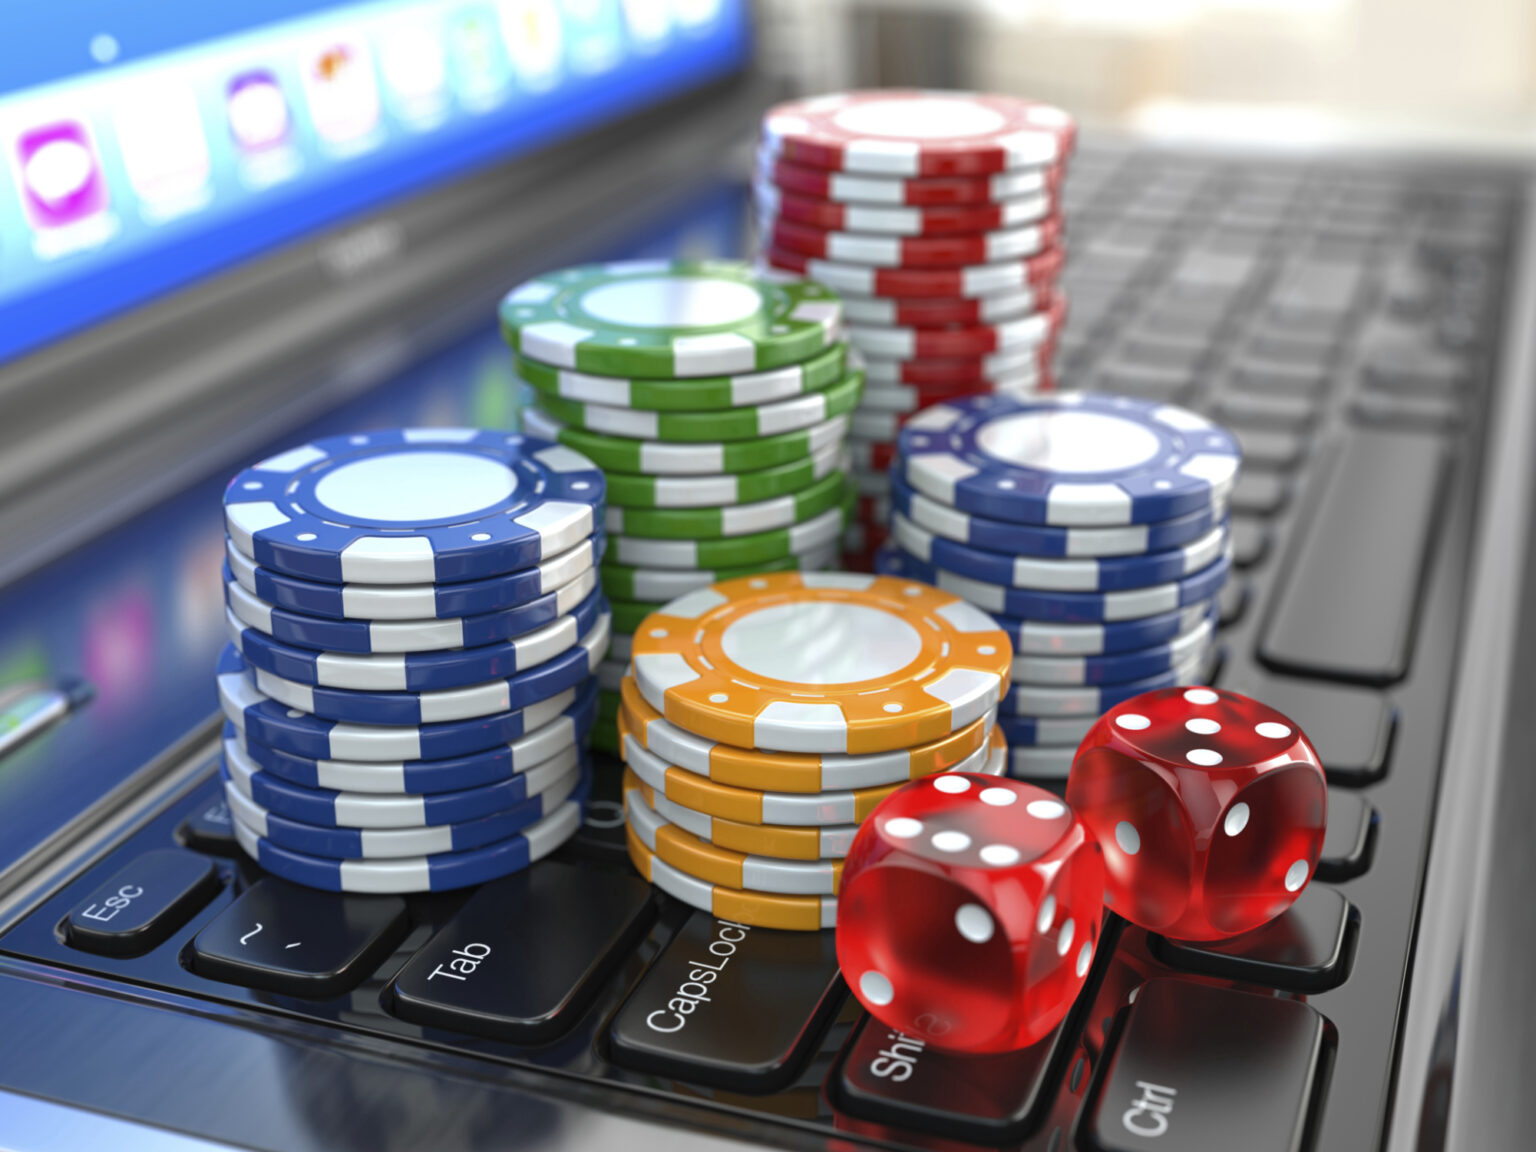 Online gambling is enjoyed by millions of individuals from all over the globe. What are New Zealand's rules for gambling online?